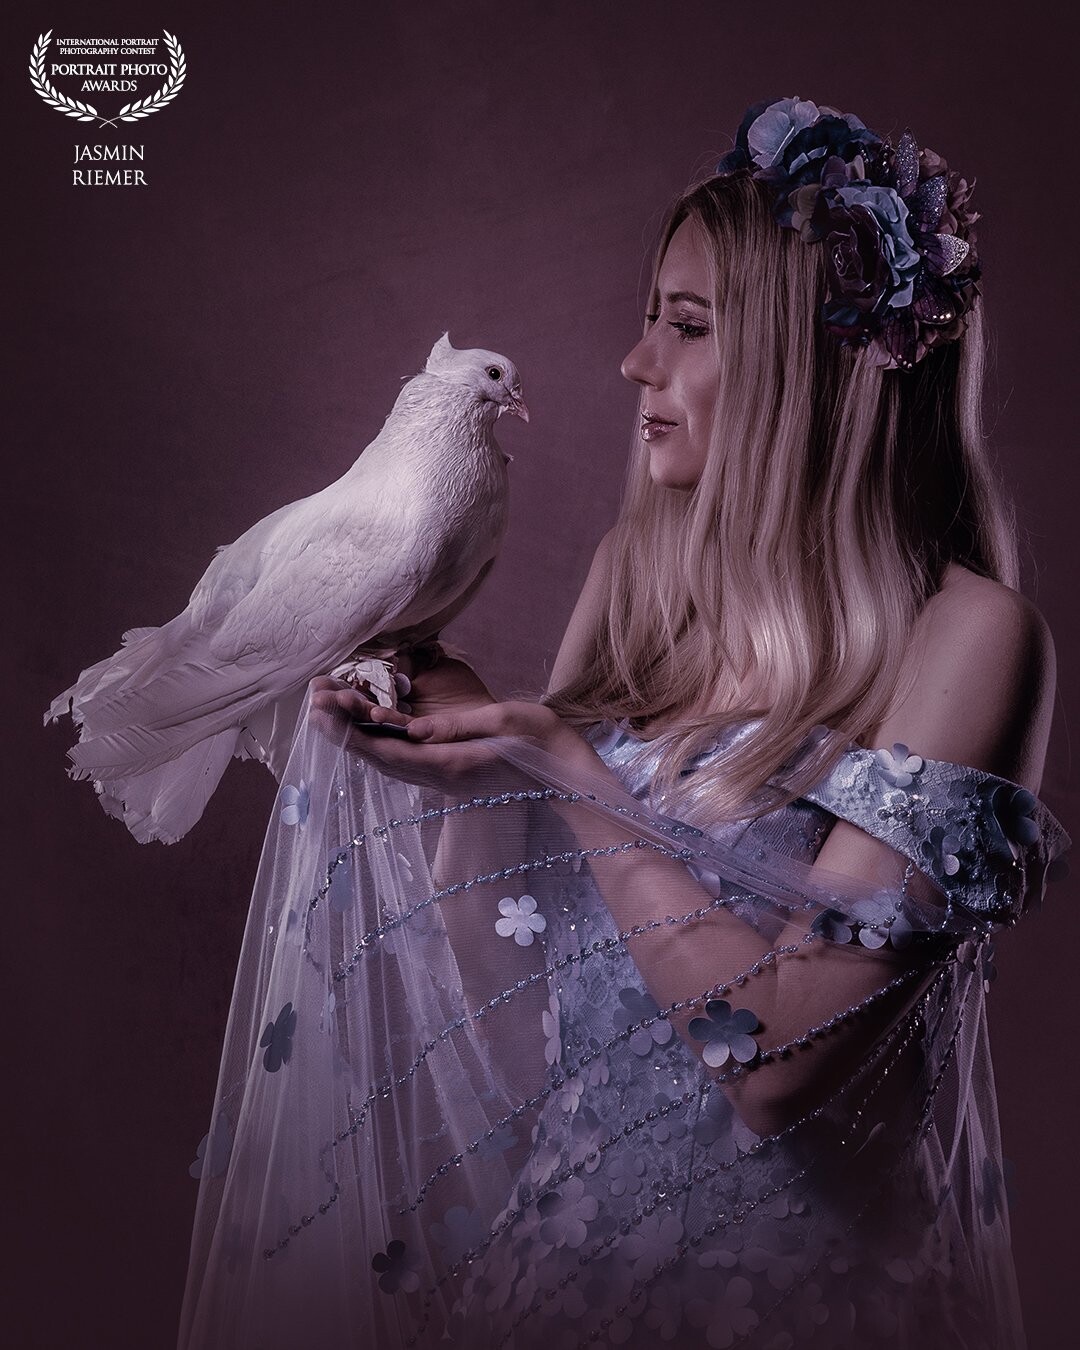 An unforgettable day.<br />
Born from just an idea in my head, this idea became reality<br />
With my lovely model Caitling I could bring my dream project to life.<br />
It has always been a dream of mine to work with doves.